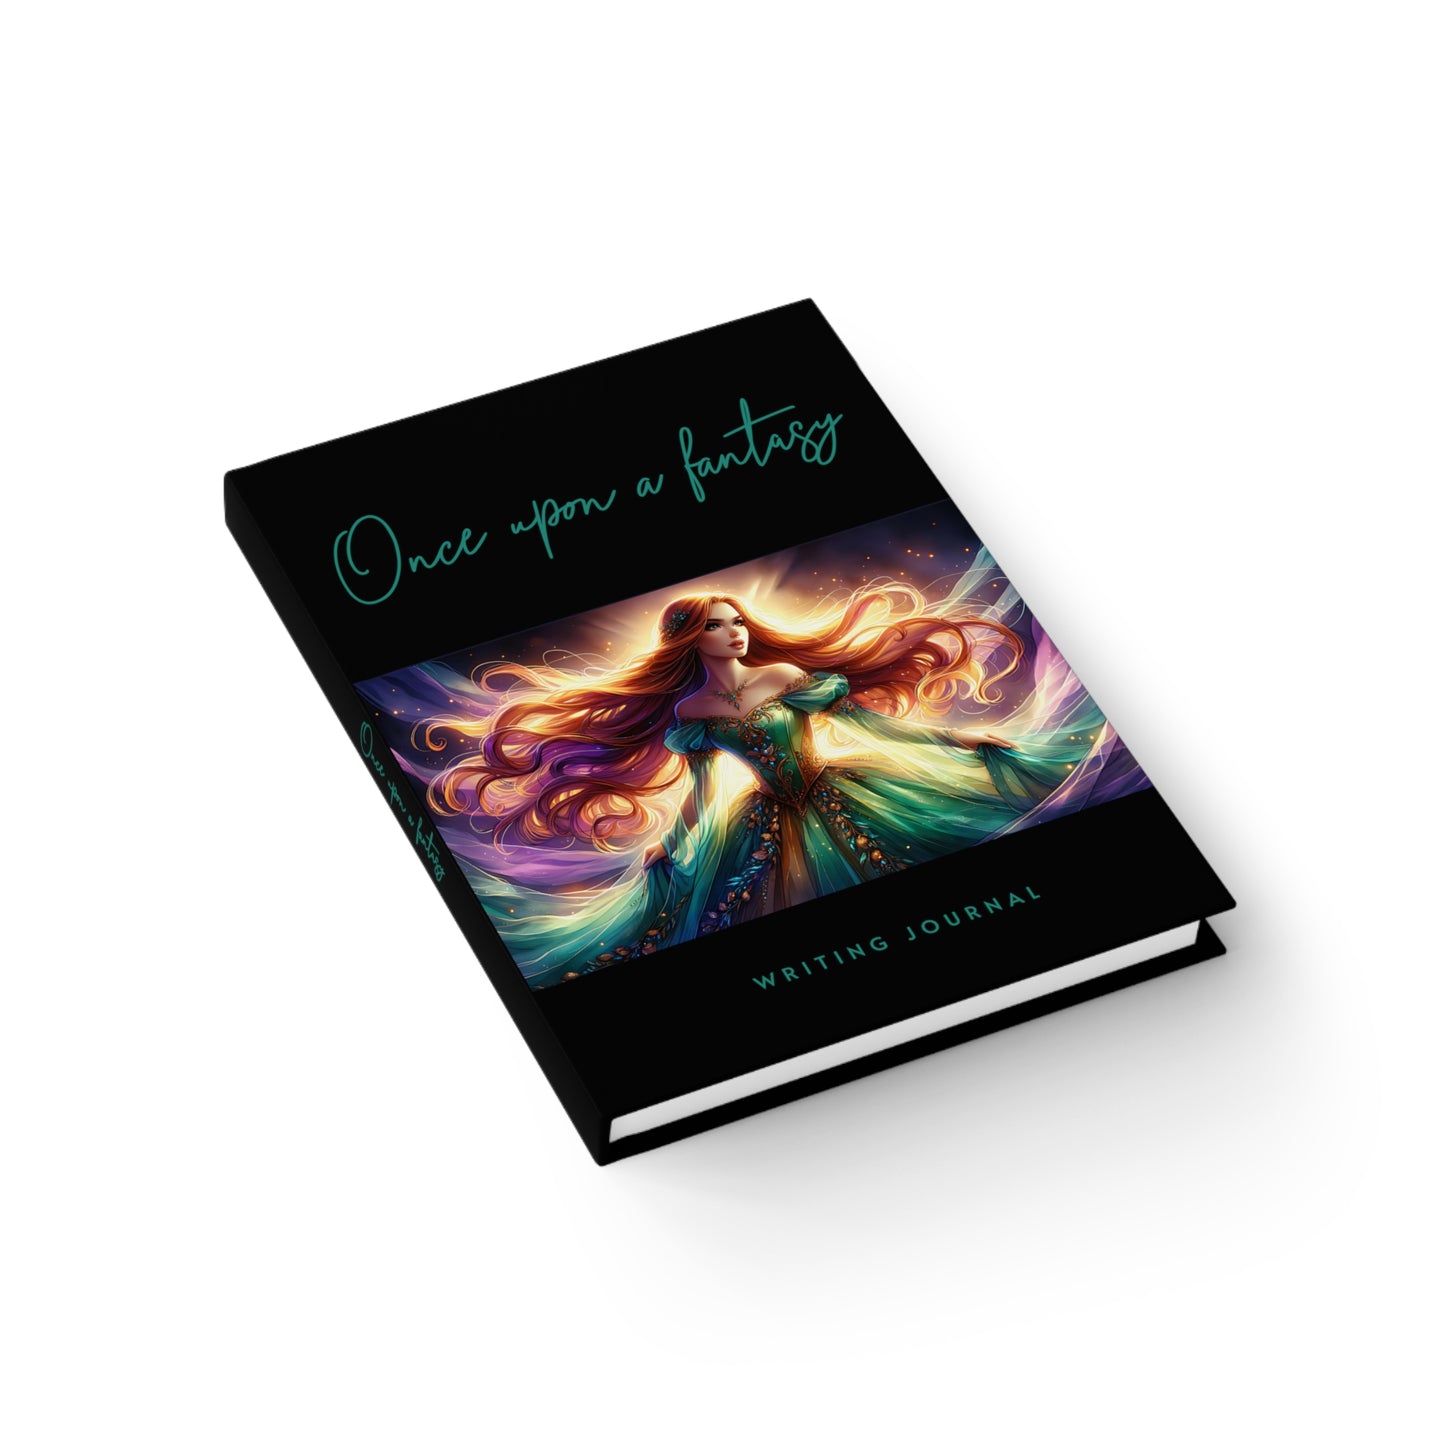 Once Upon A Fantasy - Ginger Goddess Writing Journal - Ruled Line